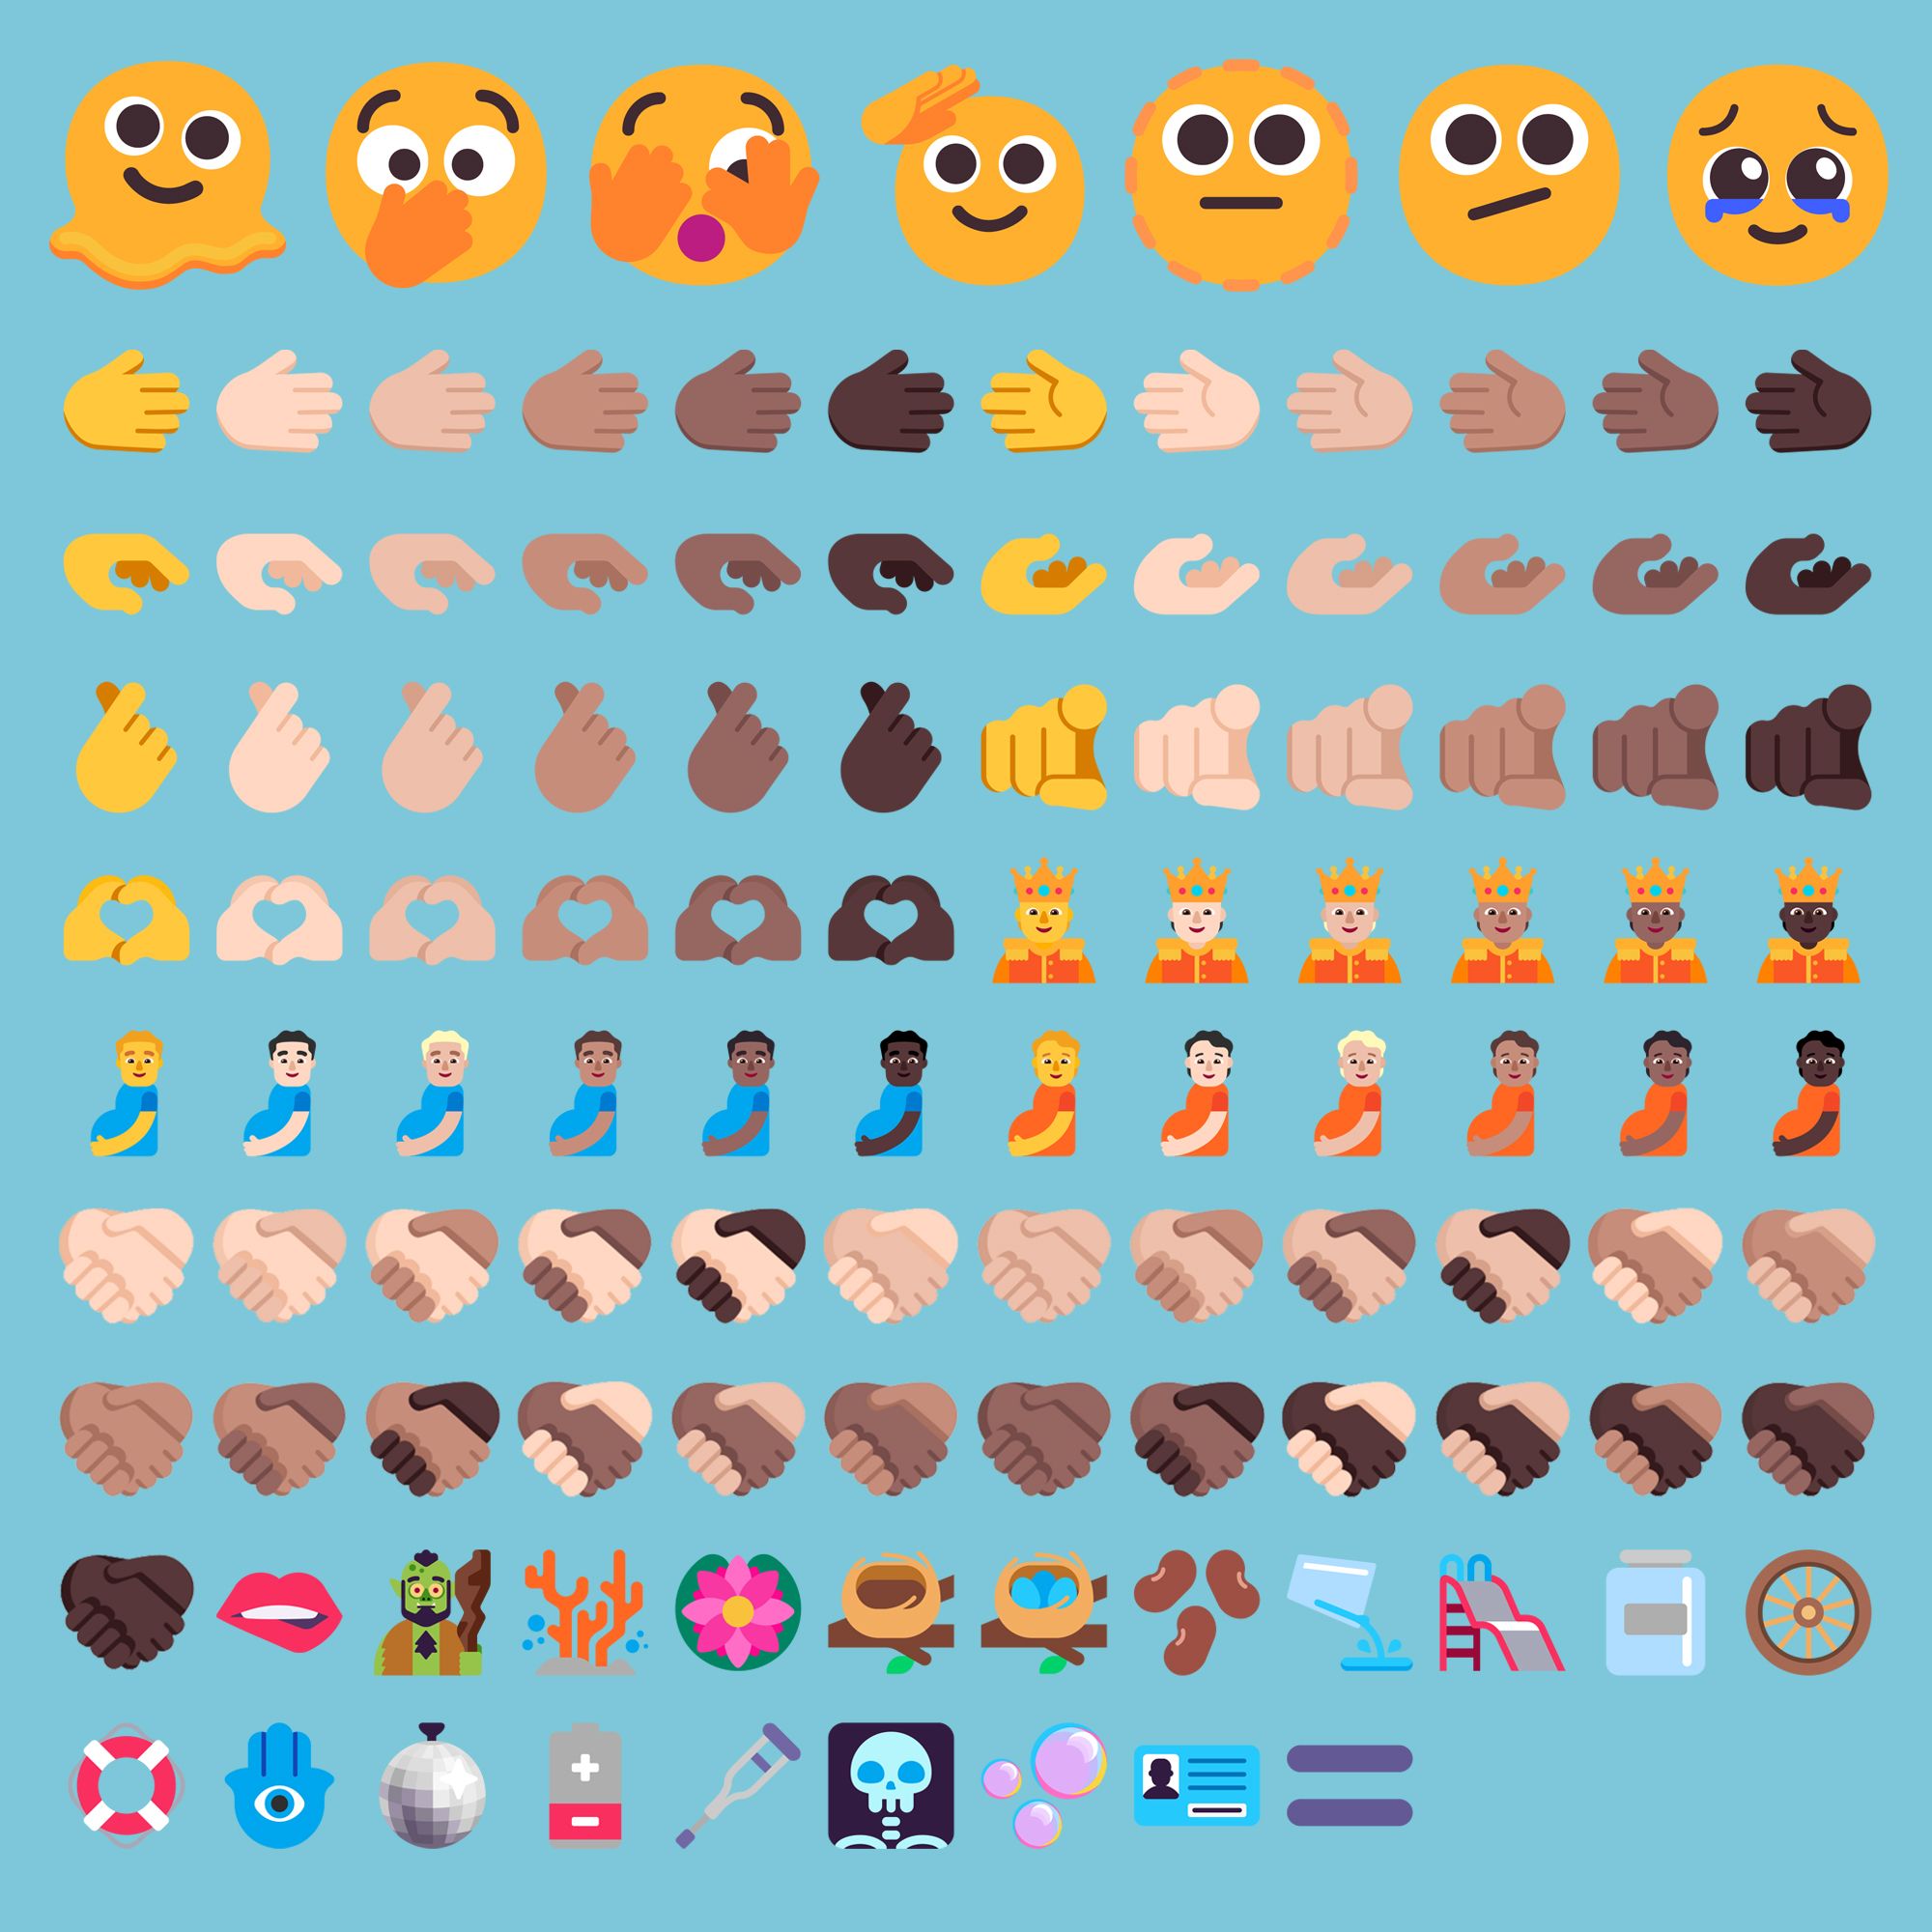 Next Emojis Will Include Melting Face, Biting Lip, Heart Hands, Troll, and  More